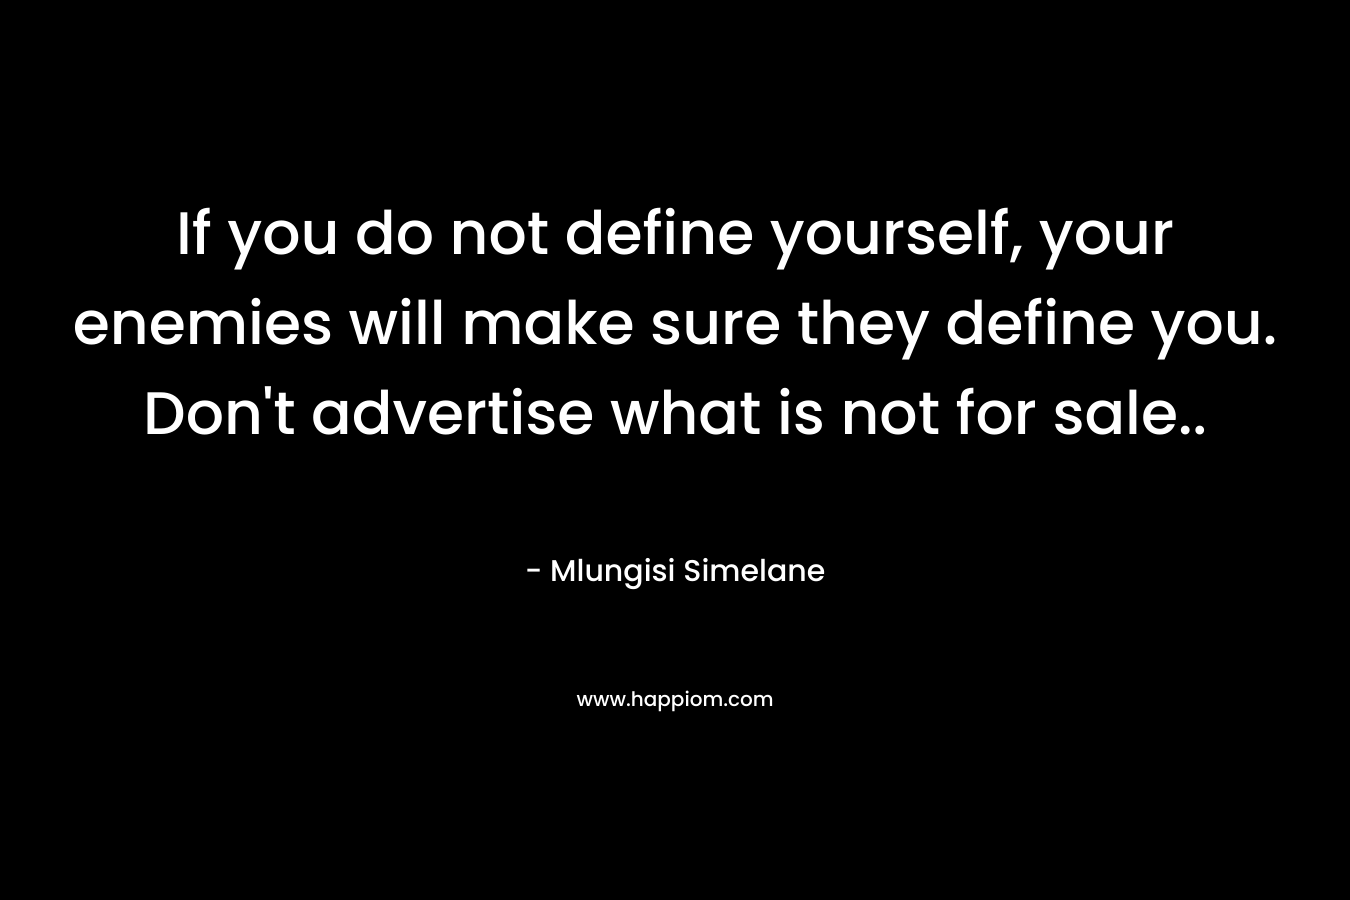 If you do not define yourself, your enemies will make sure they define you. Don't advertise what is not for sale..